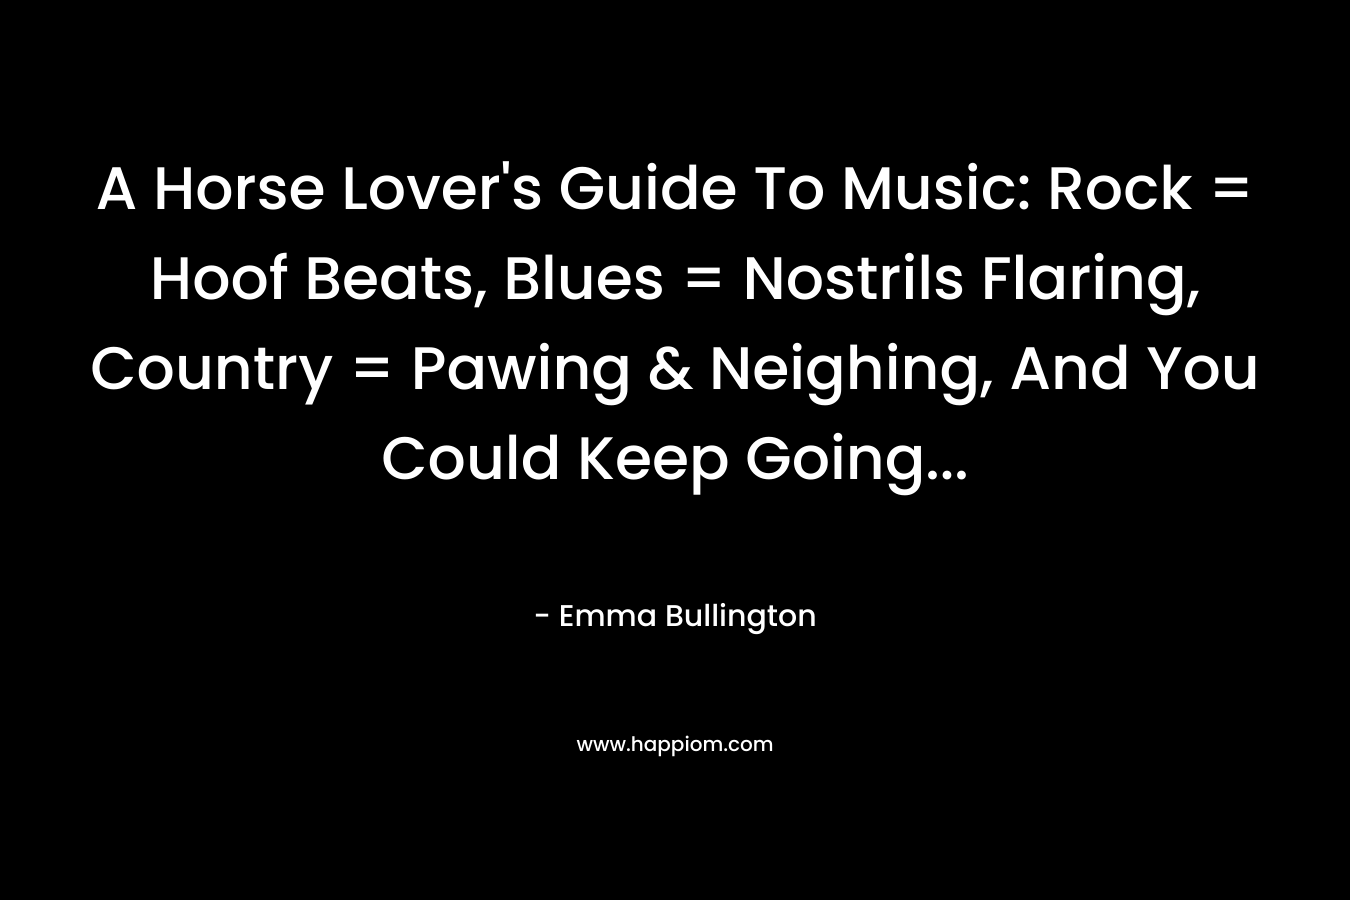 A Horse Lover’s Guide To Music: Rock = Hoof Beats, Blues = Nostrils Flaring, Country = Pawing & Neighing, And You Could Keep Going… – Emma Bullington